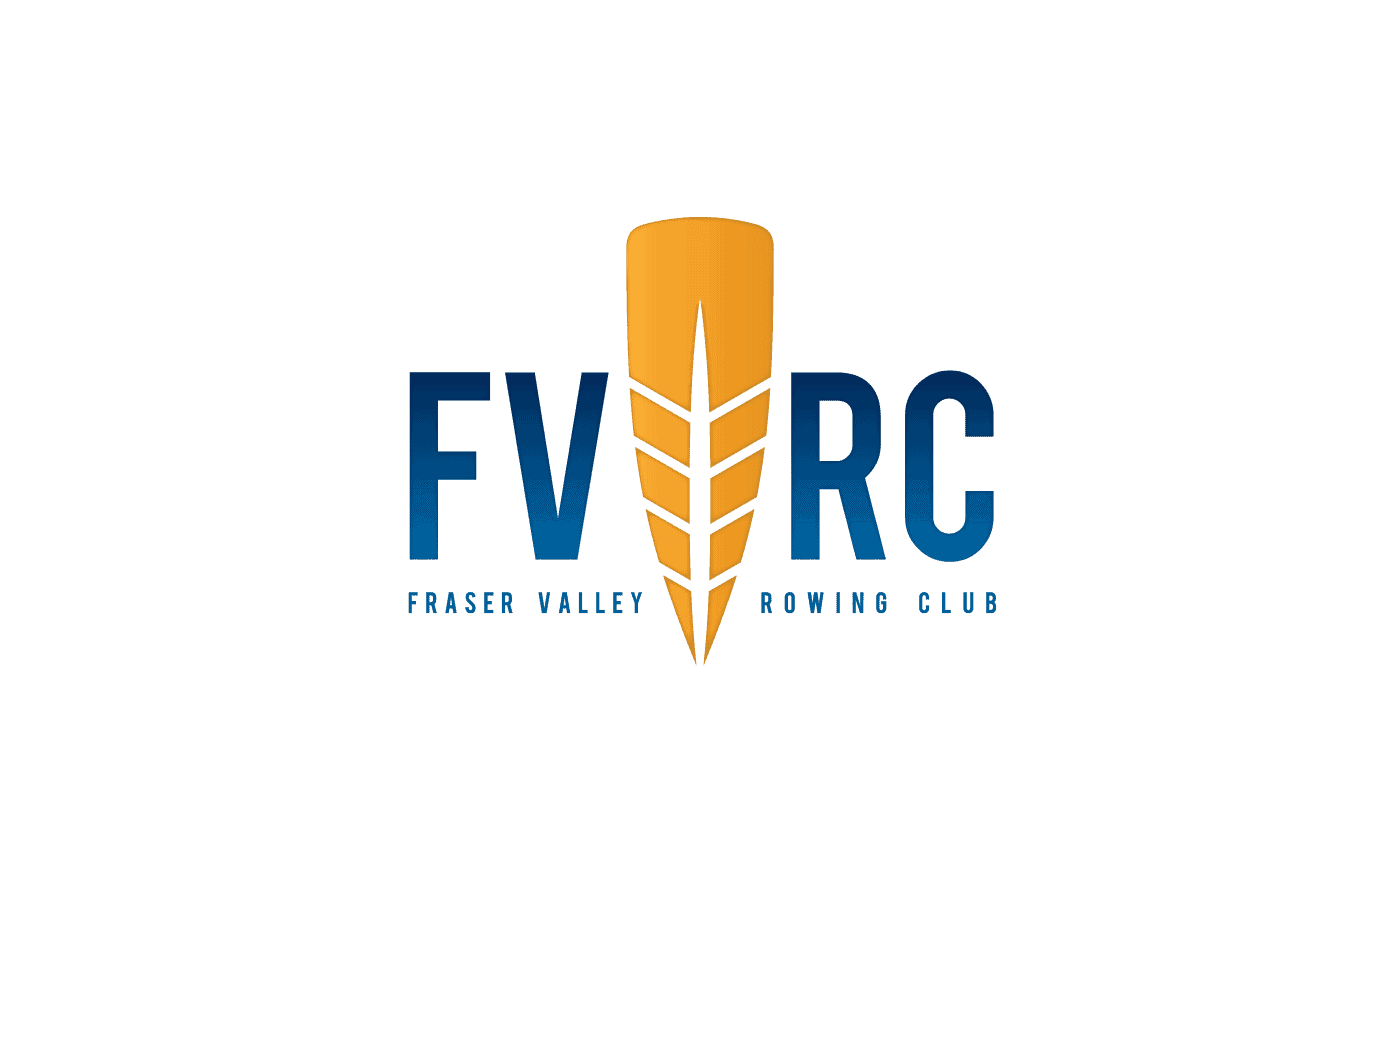 Fraser Valley Rowing Club